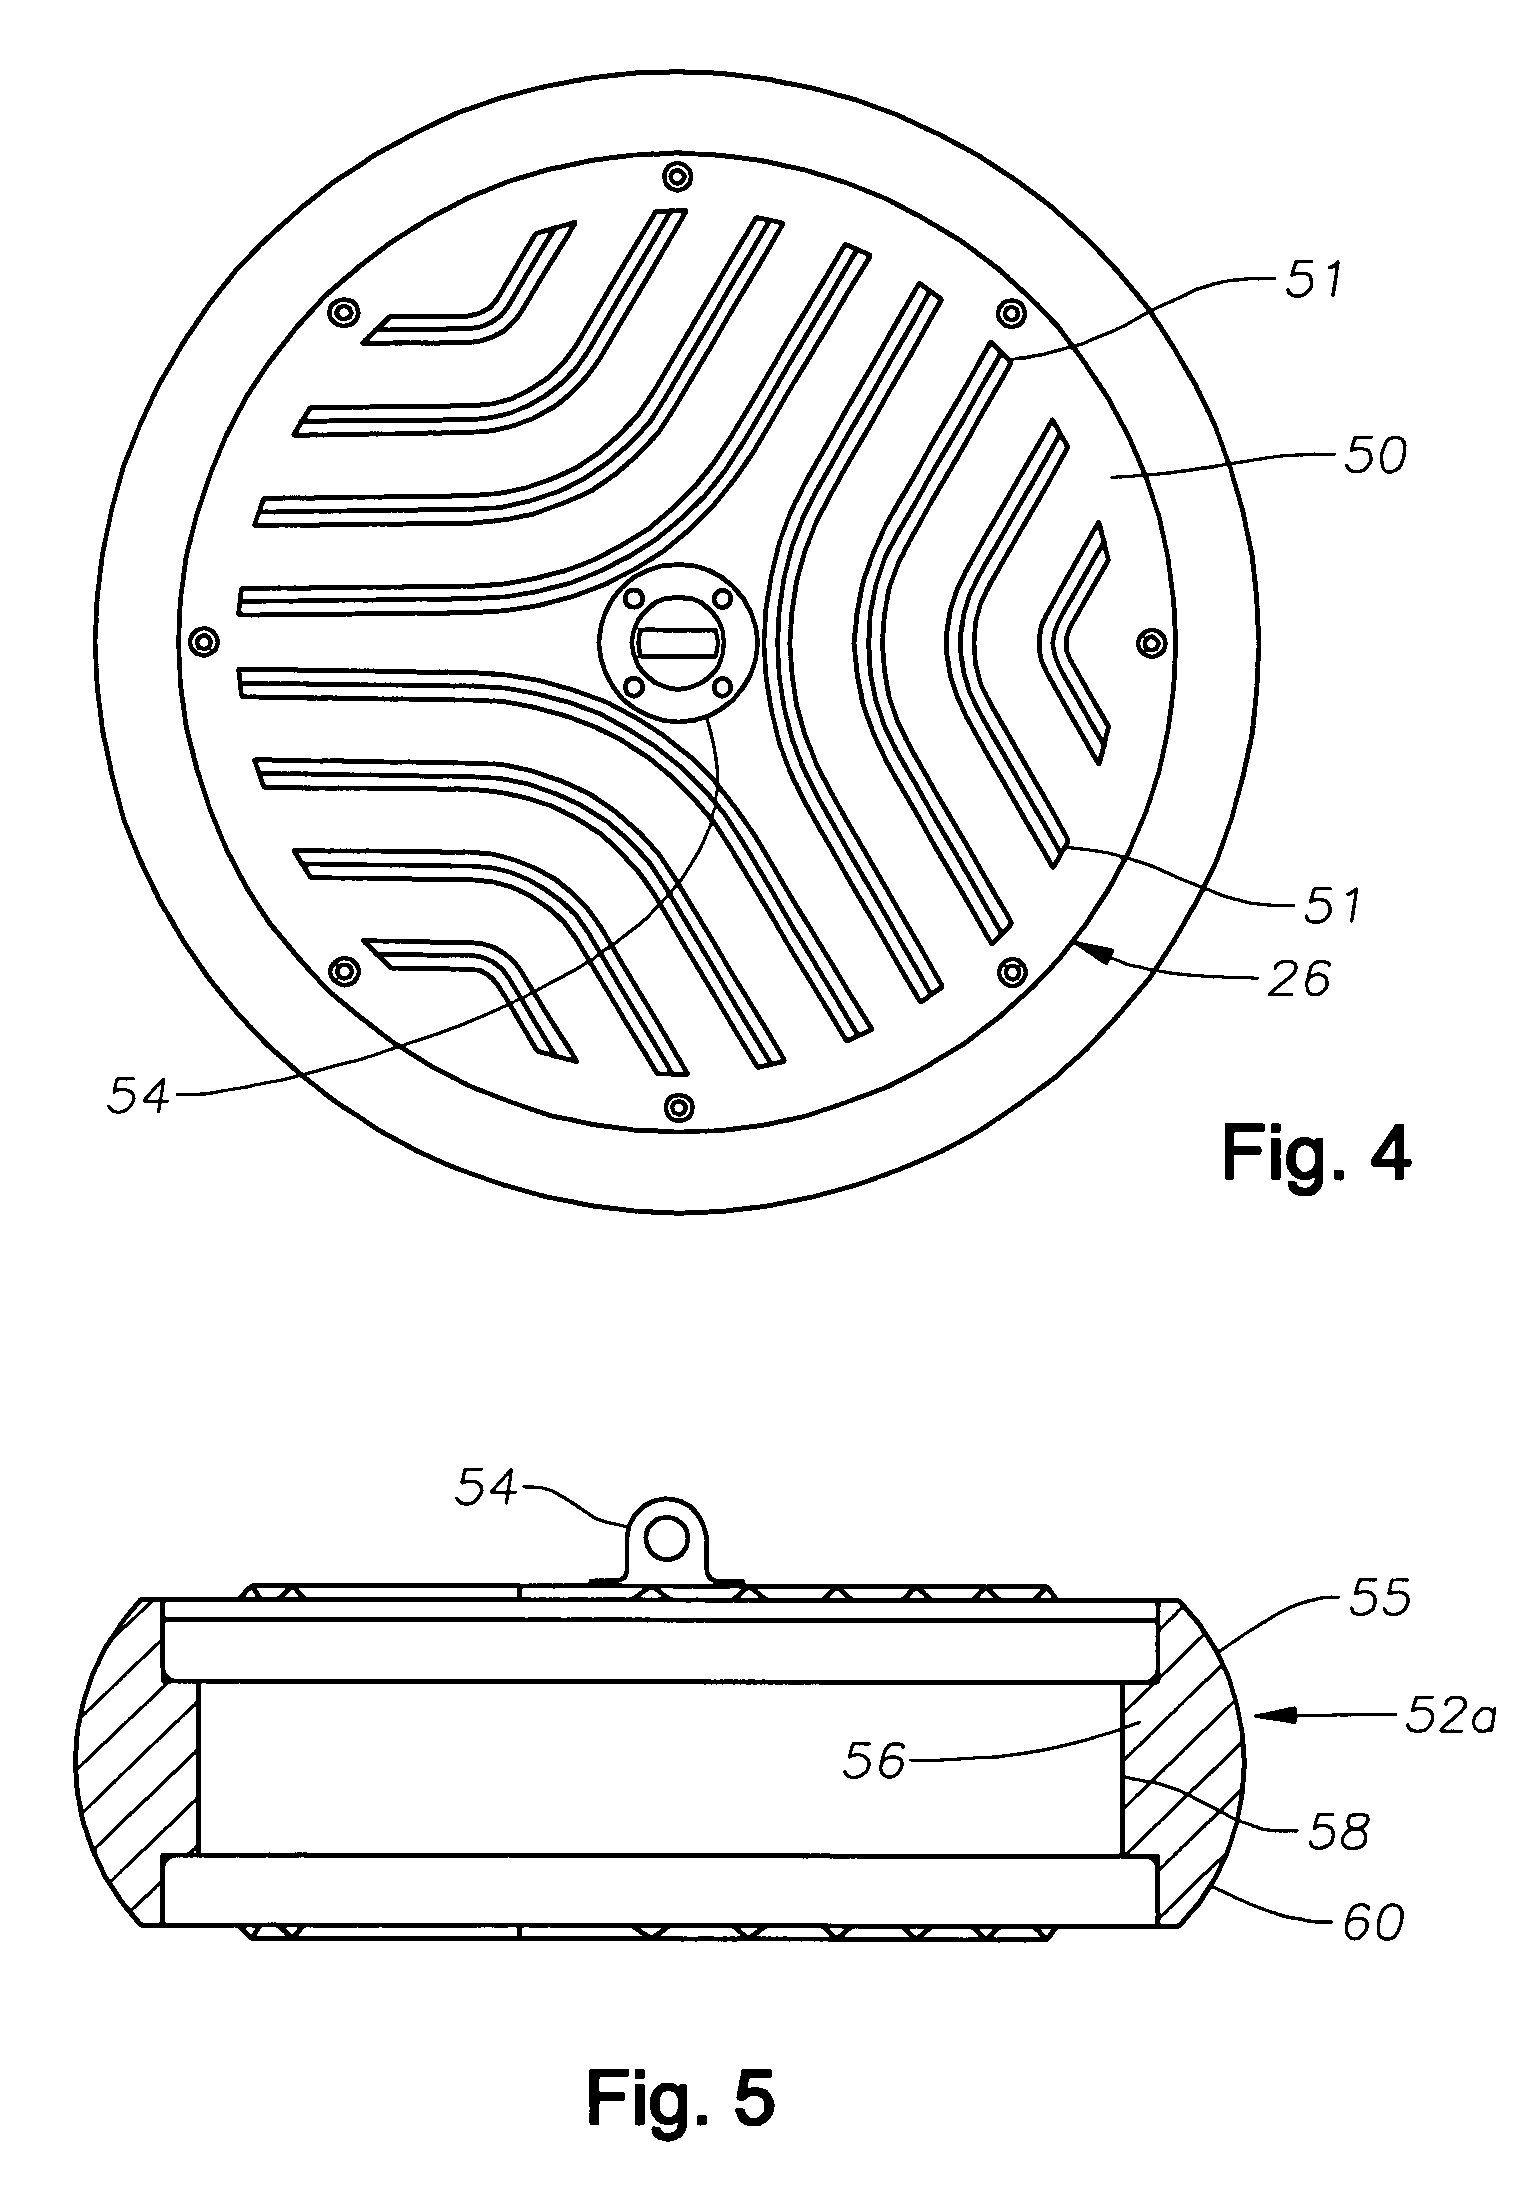 Method and apparatus for seismic data acquisition